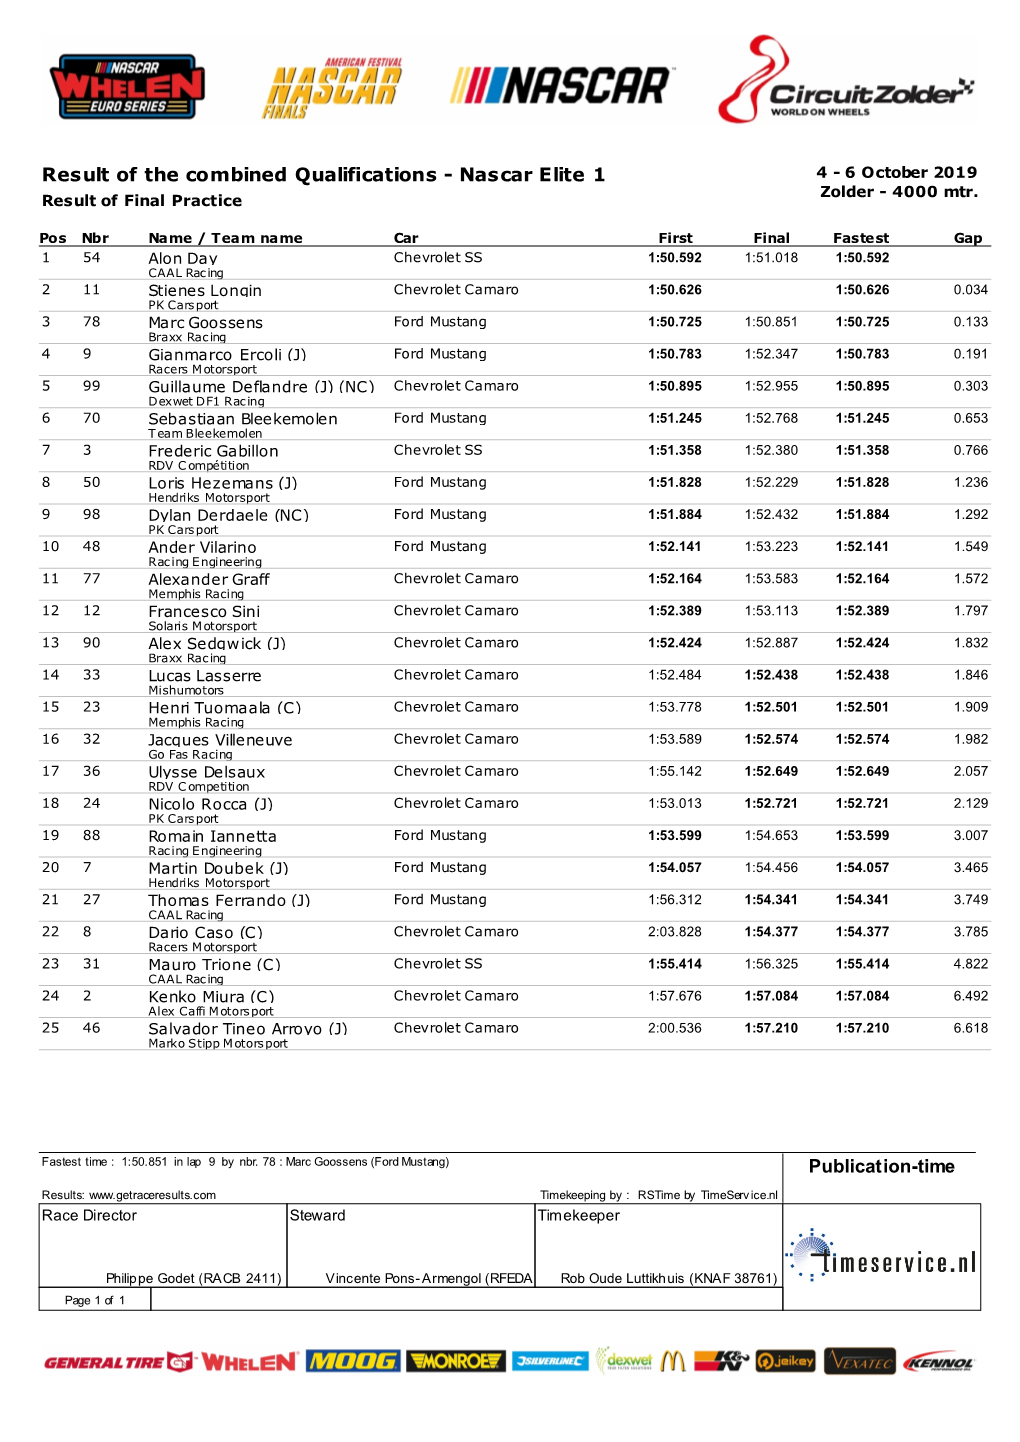 Result of the Combined Qualifications - Nascar Elite 1 4 - 6 October 2019 Zolder - 4000 Mtr